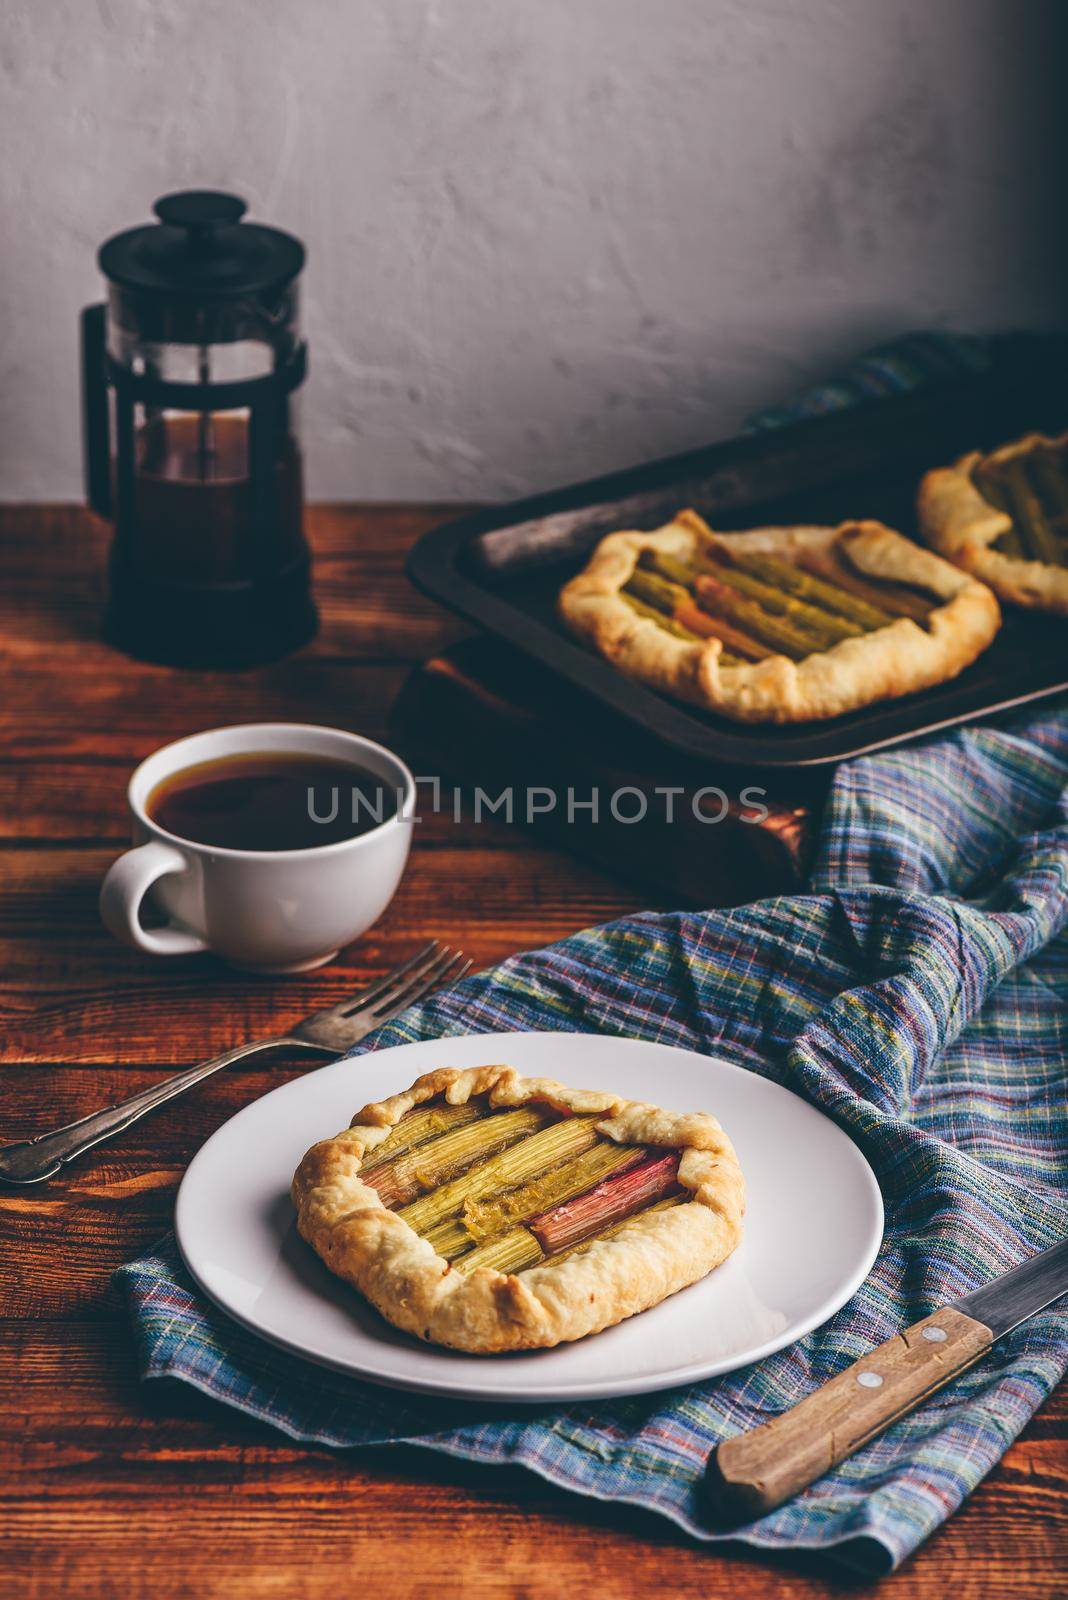 Rhubarb mini galette on white plate and cup of coffee